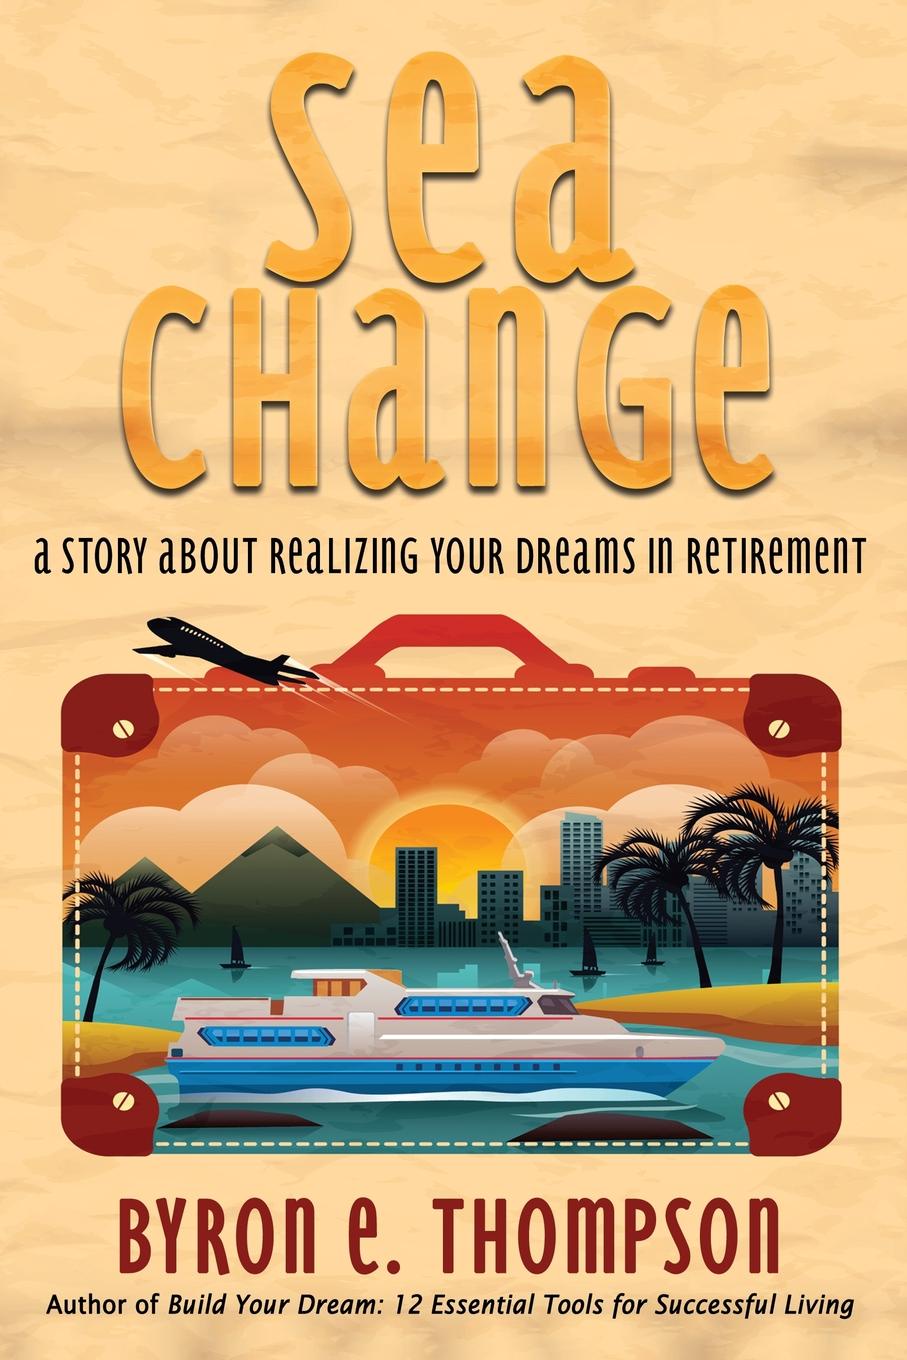 Sea Change. A Story About Realizing Your Dreams in Retirement